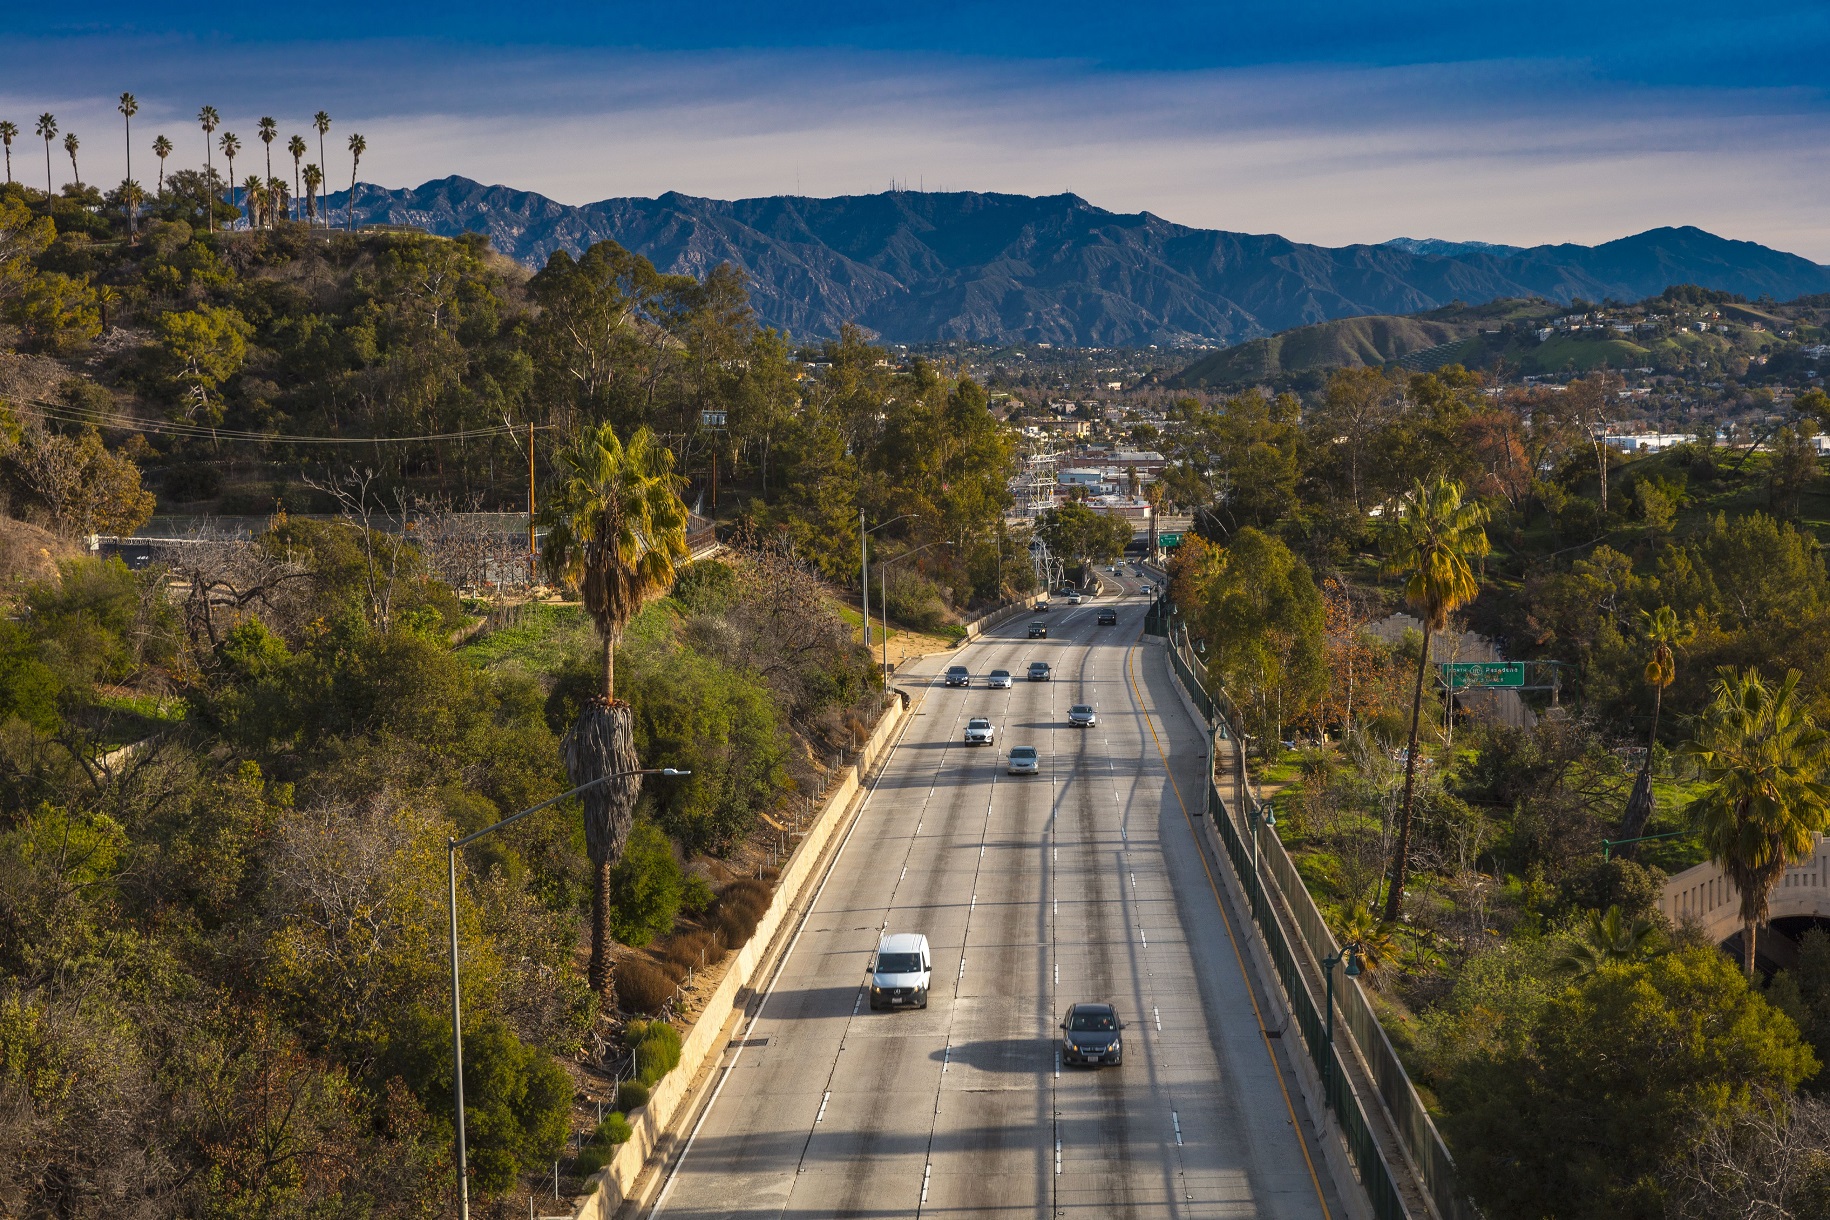 Pasadena Freeway, Arroyo Seco Parkway, CA 110 leads to downtown Los Angeles in morning light.